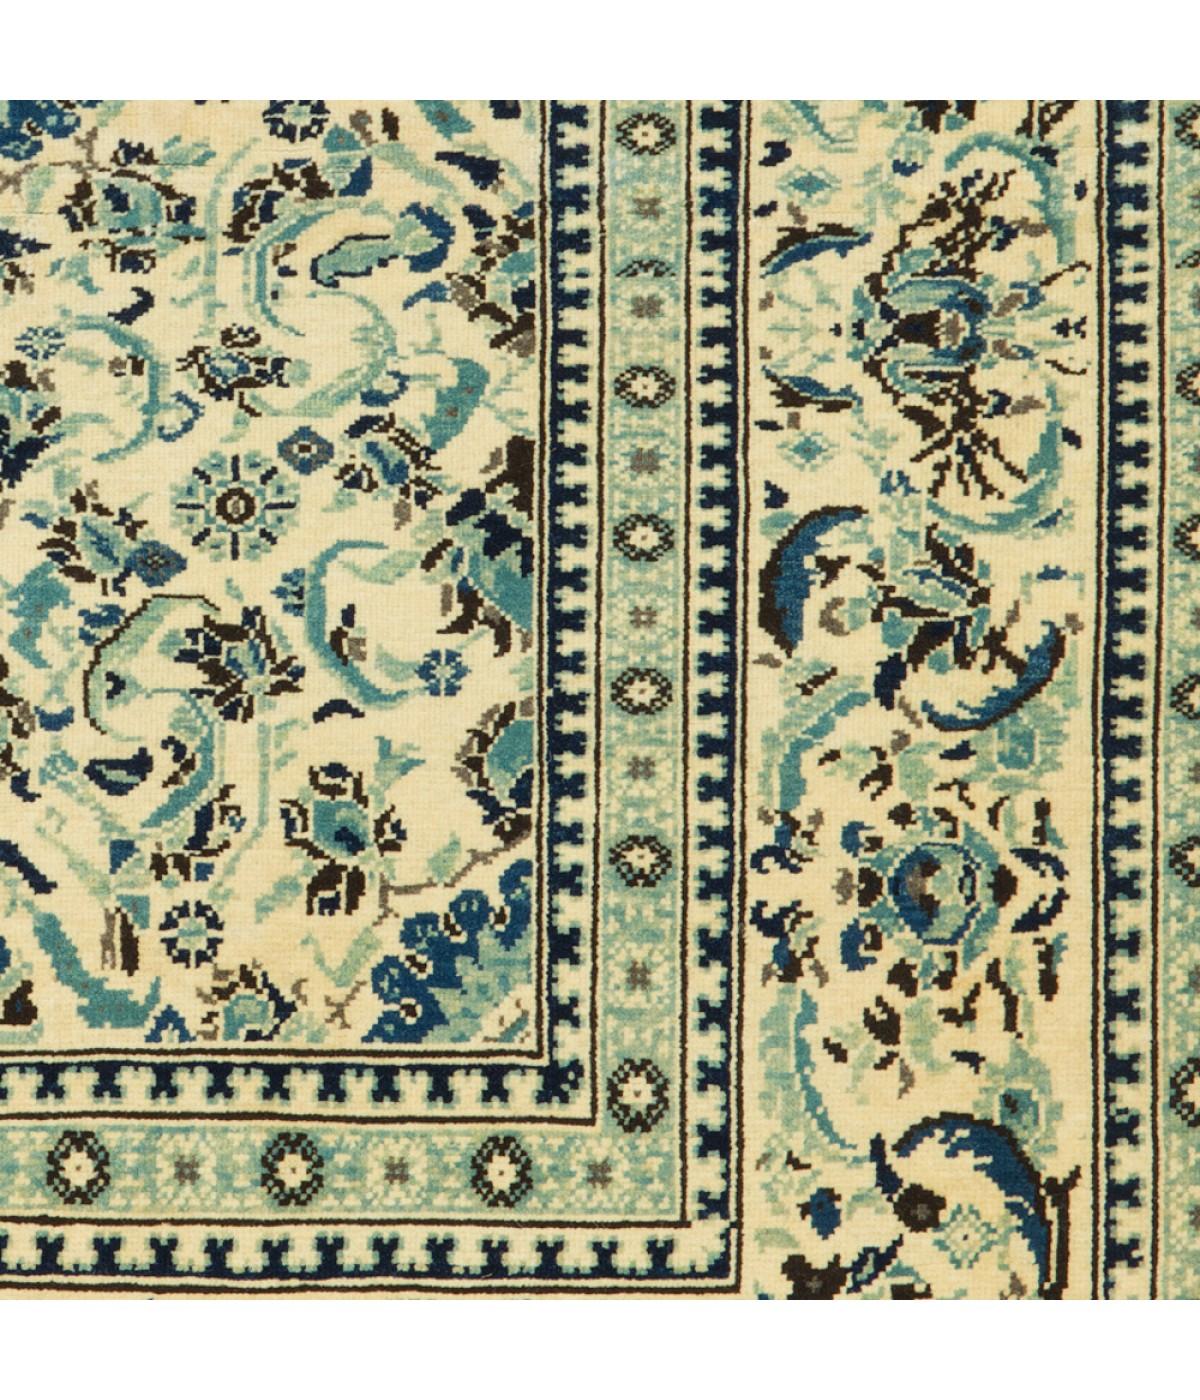 Turkish Court Manufactury Rugs were woven in the Egyptian workshops founded by the Ottoman Empire in the 16th century. Those carpets were woven in Egypt, following the paper cartoons probably created in Istanbul and sent to Cairo at that time.